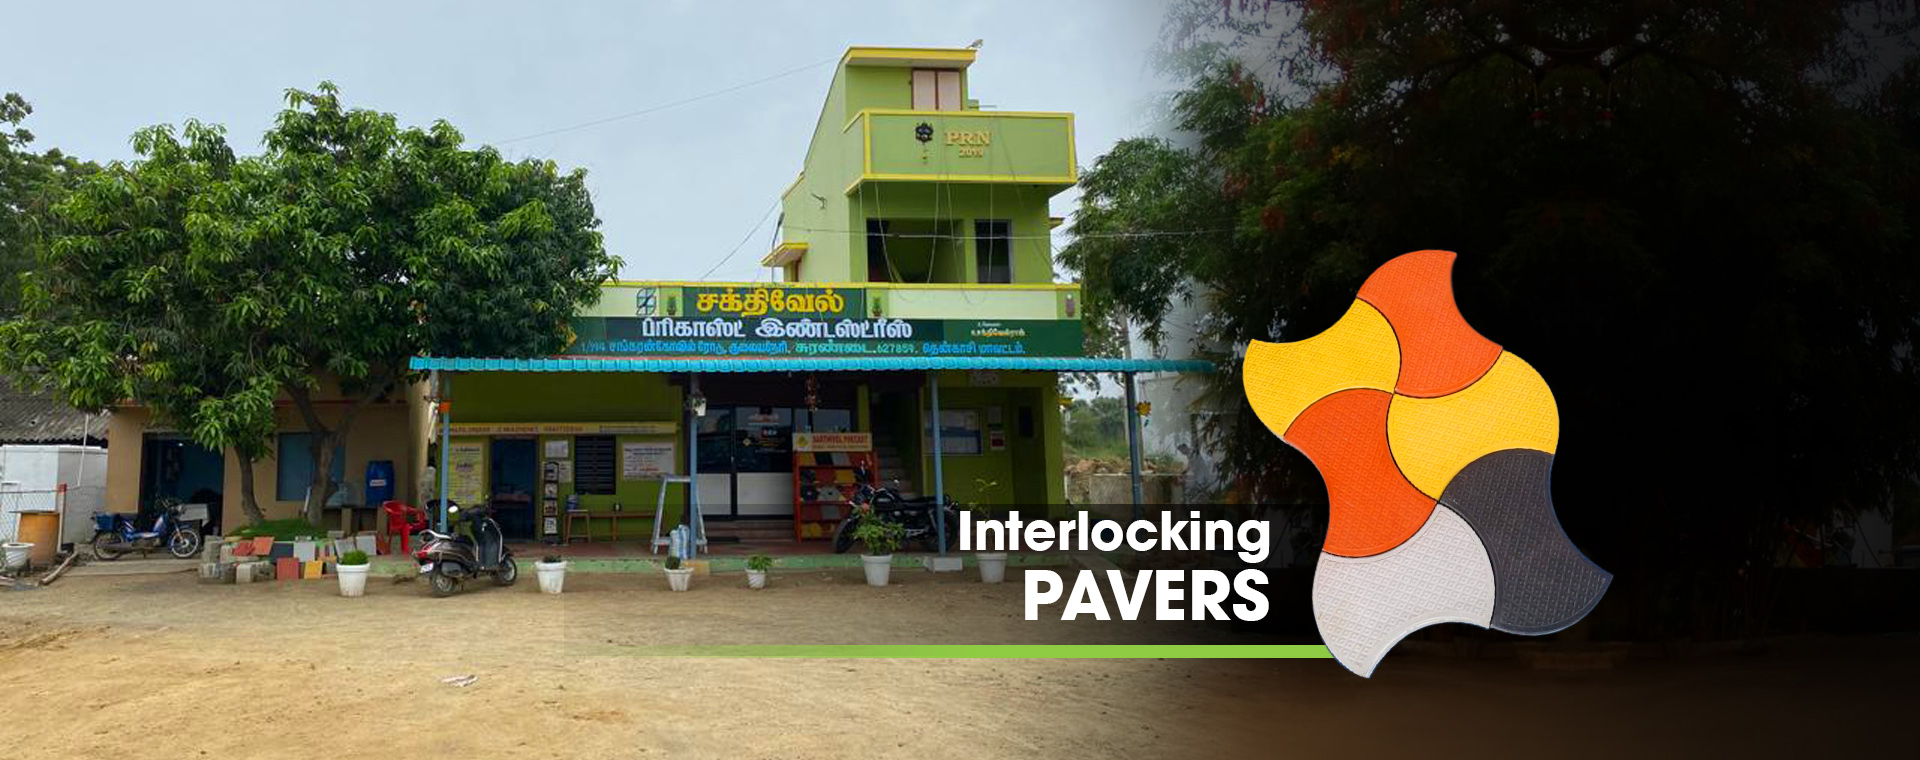 Interlocking Pavers Manufacturers,Suppliers and Dealers